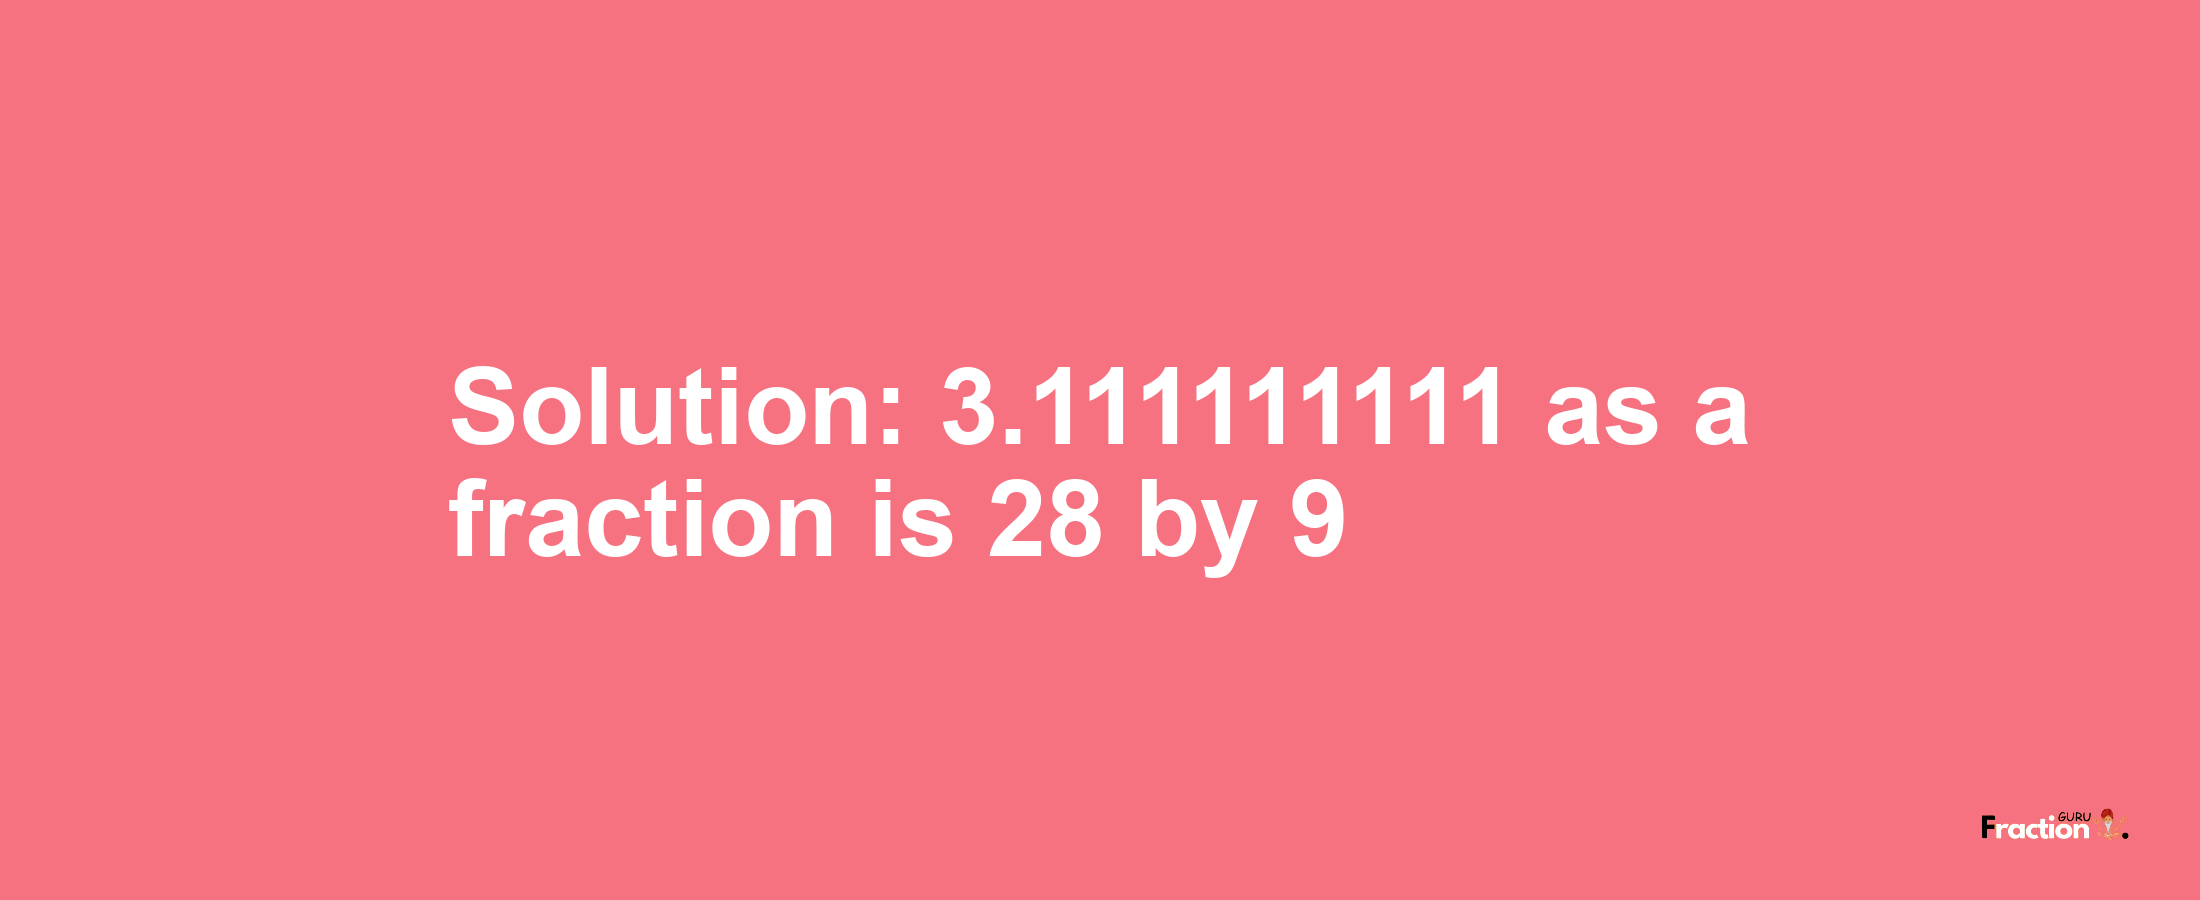 Solution:3.111111111 as a fraction is 28/9